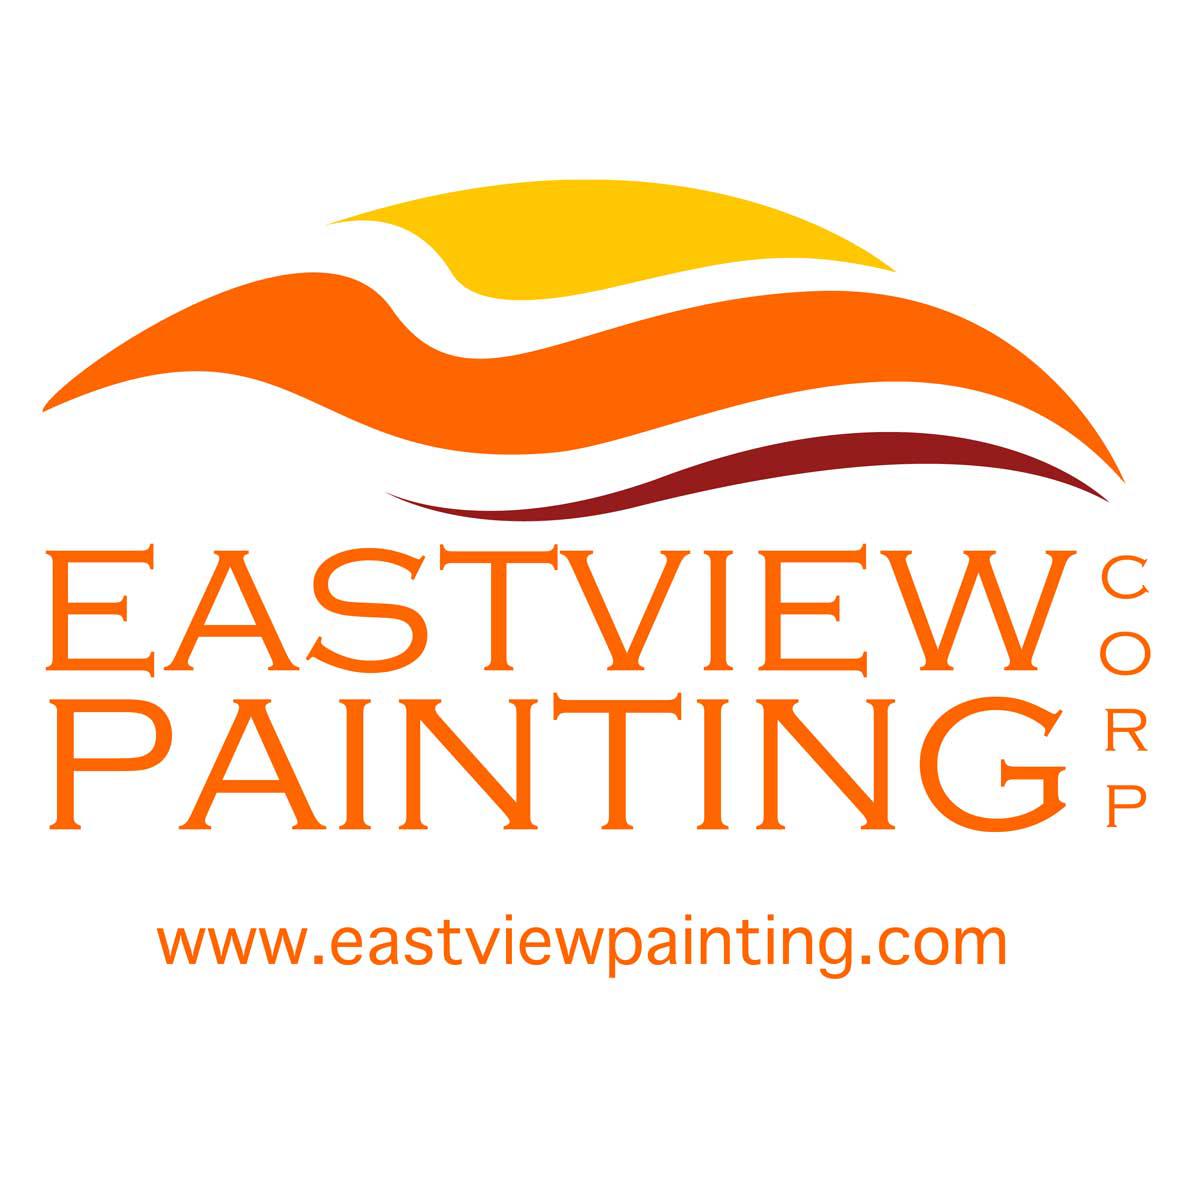 Eastview Painting Corp Logo